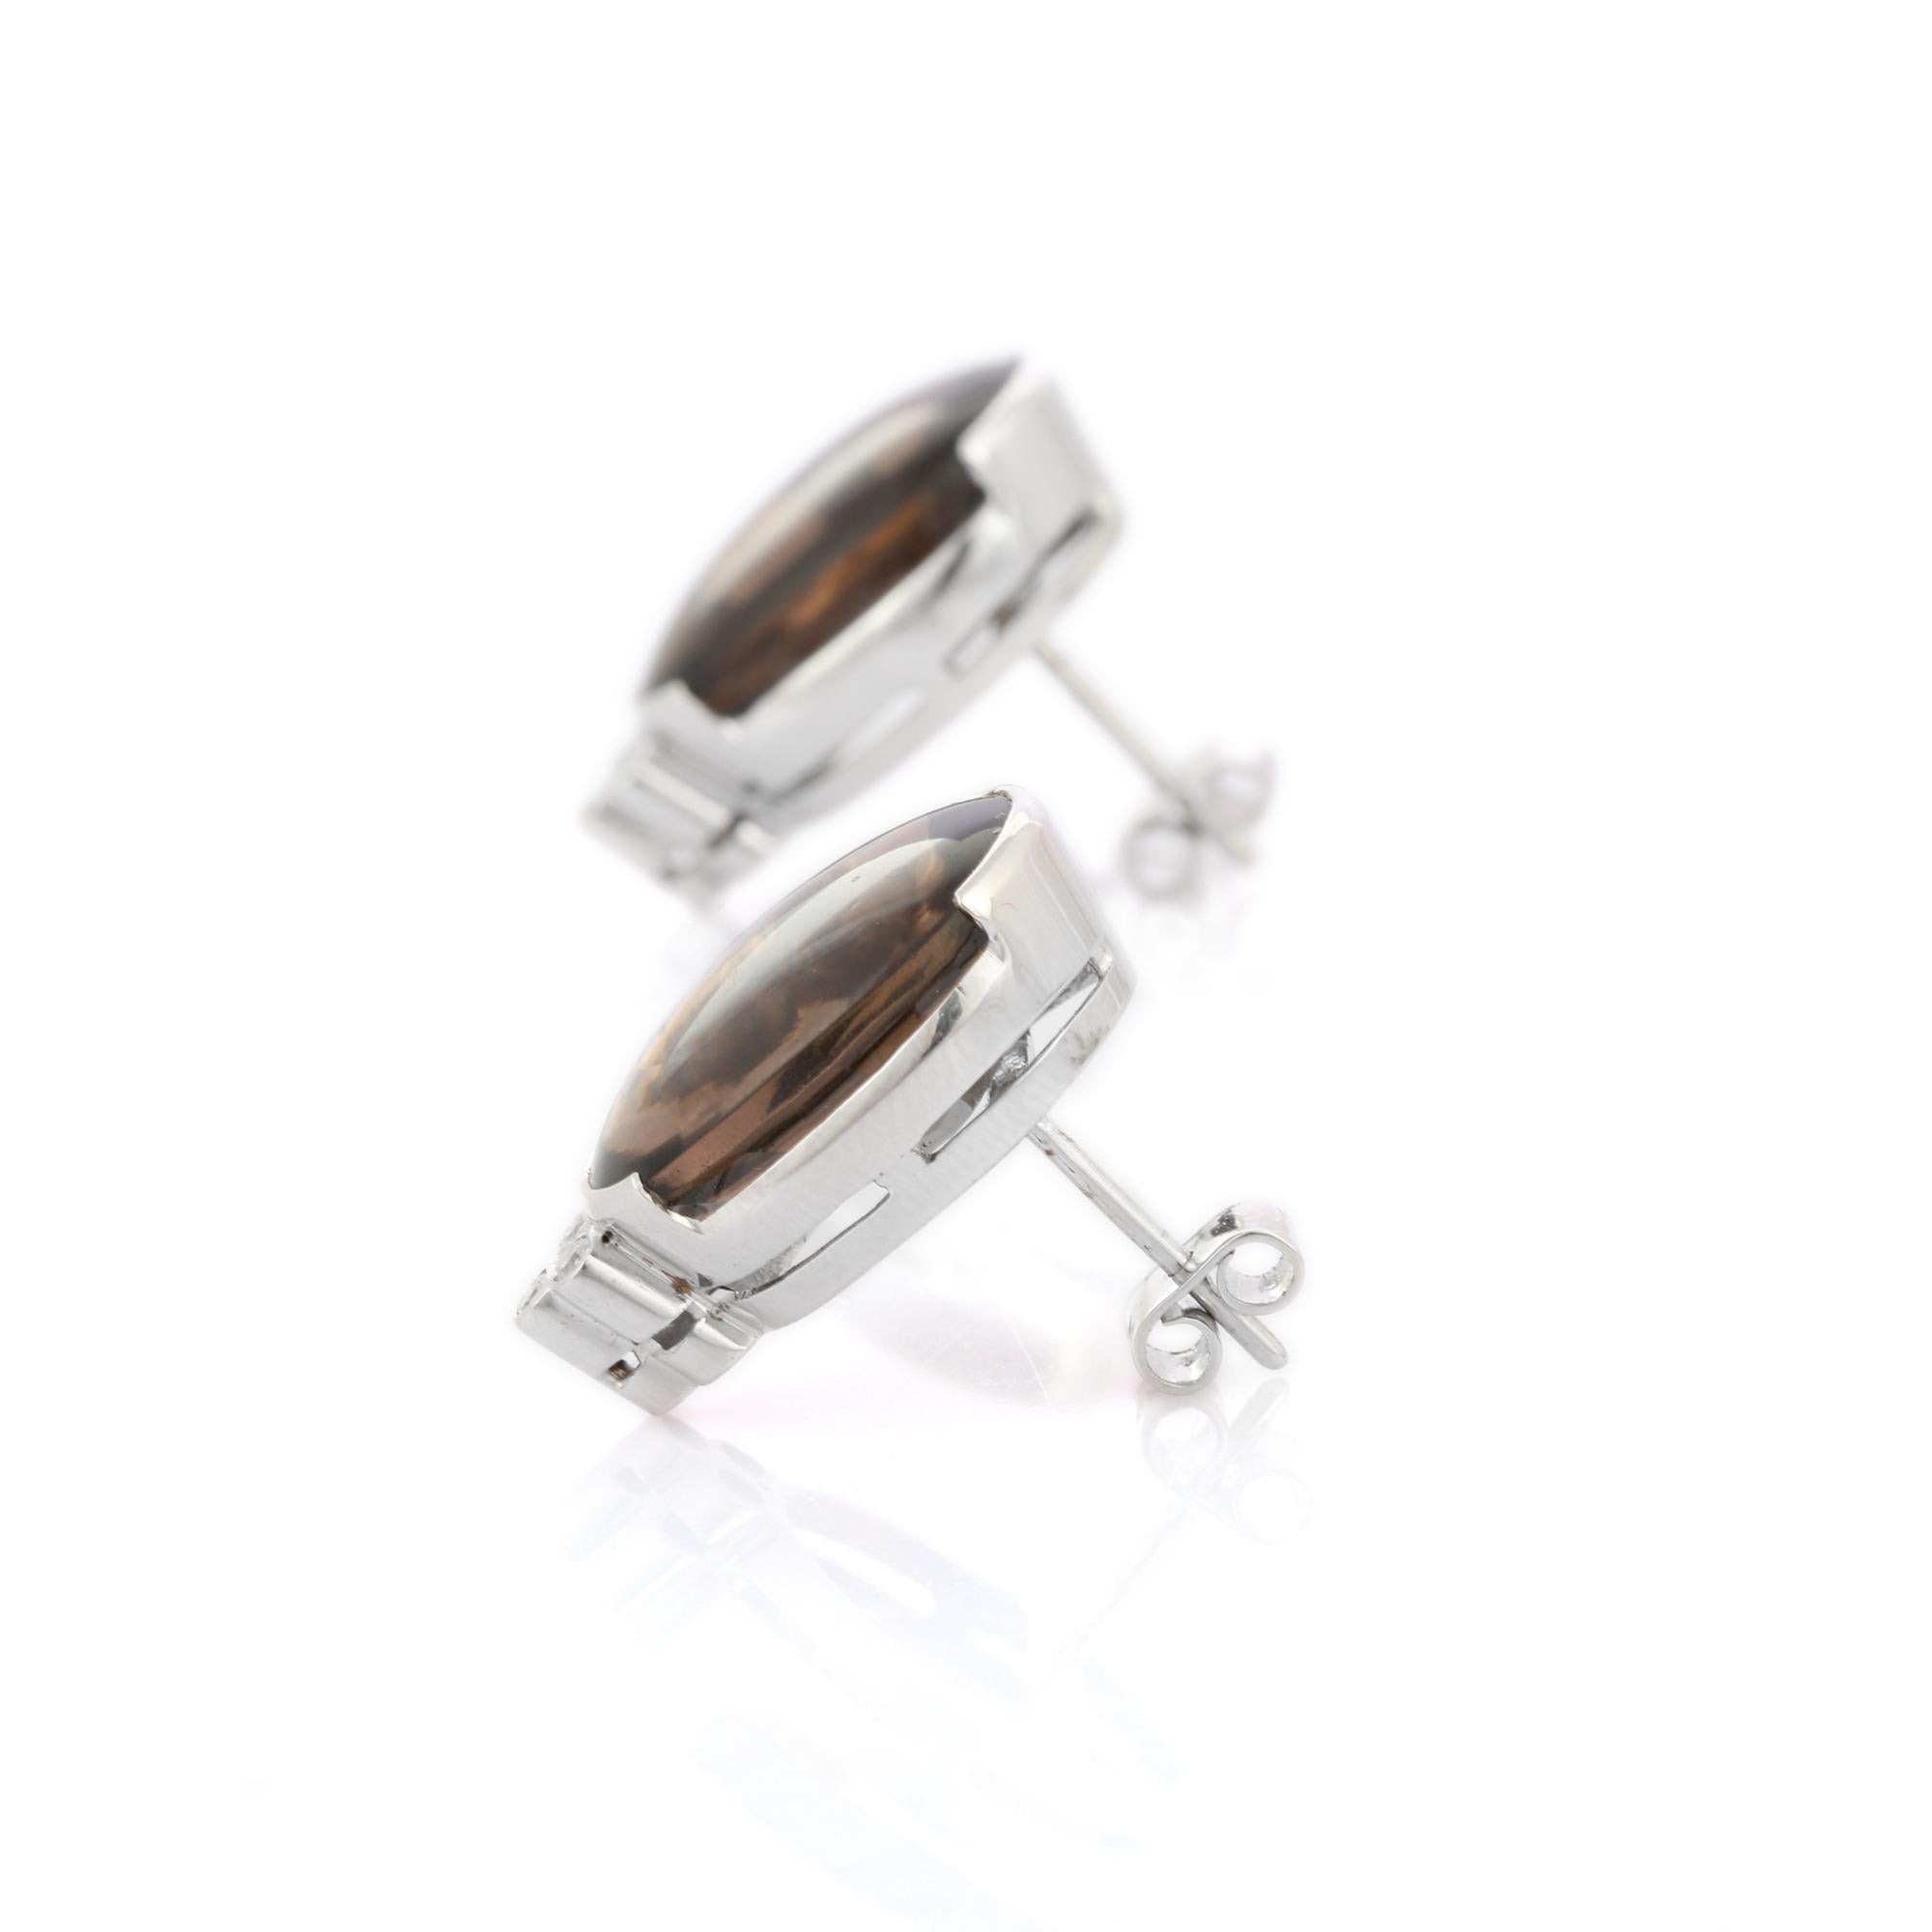 Studs create a subtle beauty while showcasing the colors of the natural precious gemstones and illuminating diamonds making a statement.
Statement oval cut dark brown smoky quartz and diamonds studs in 14K gold. Embrace your look with these stunning